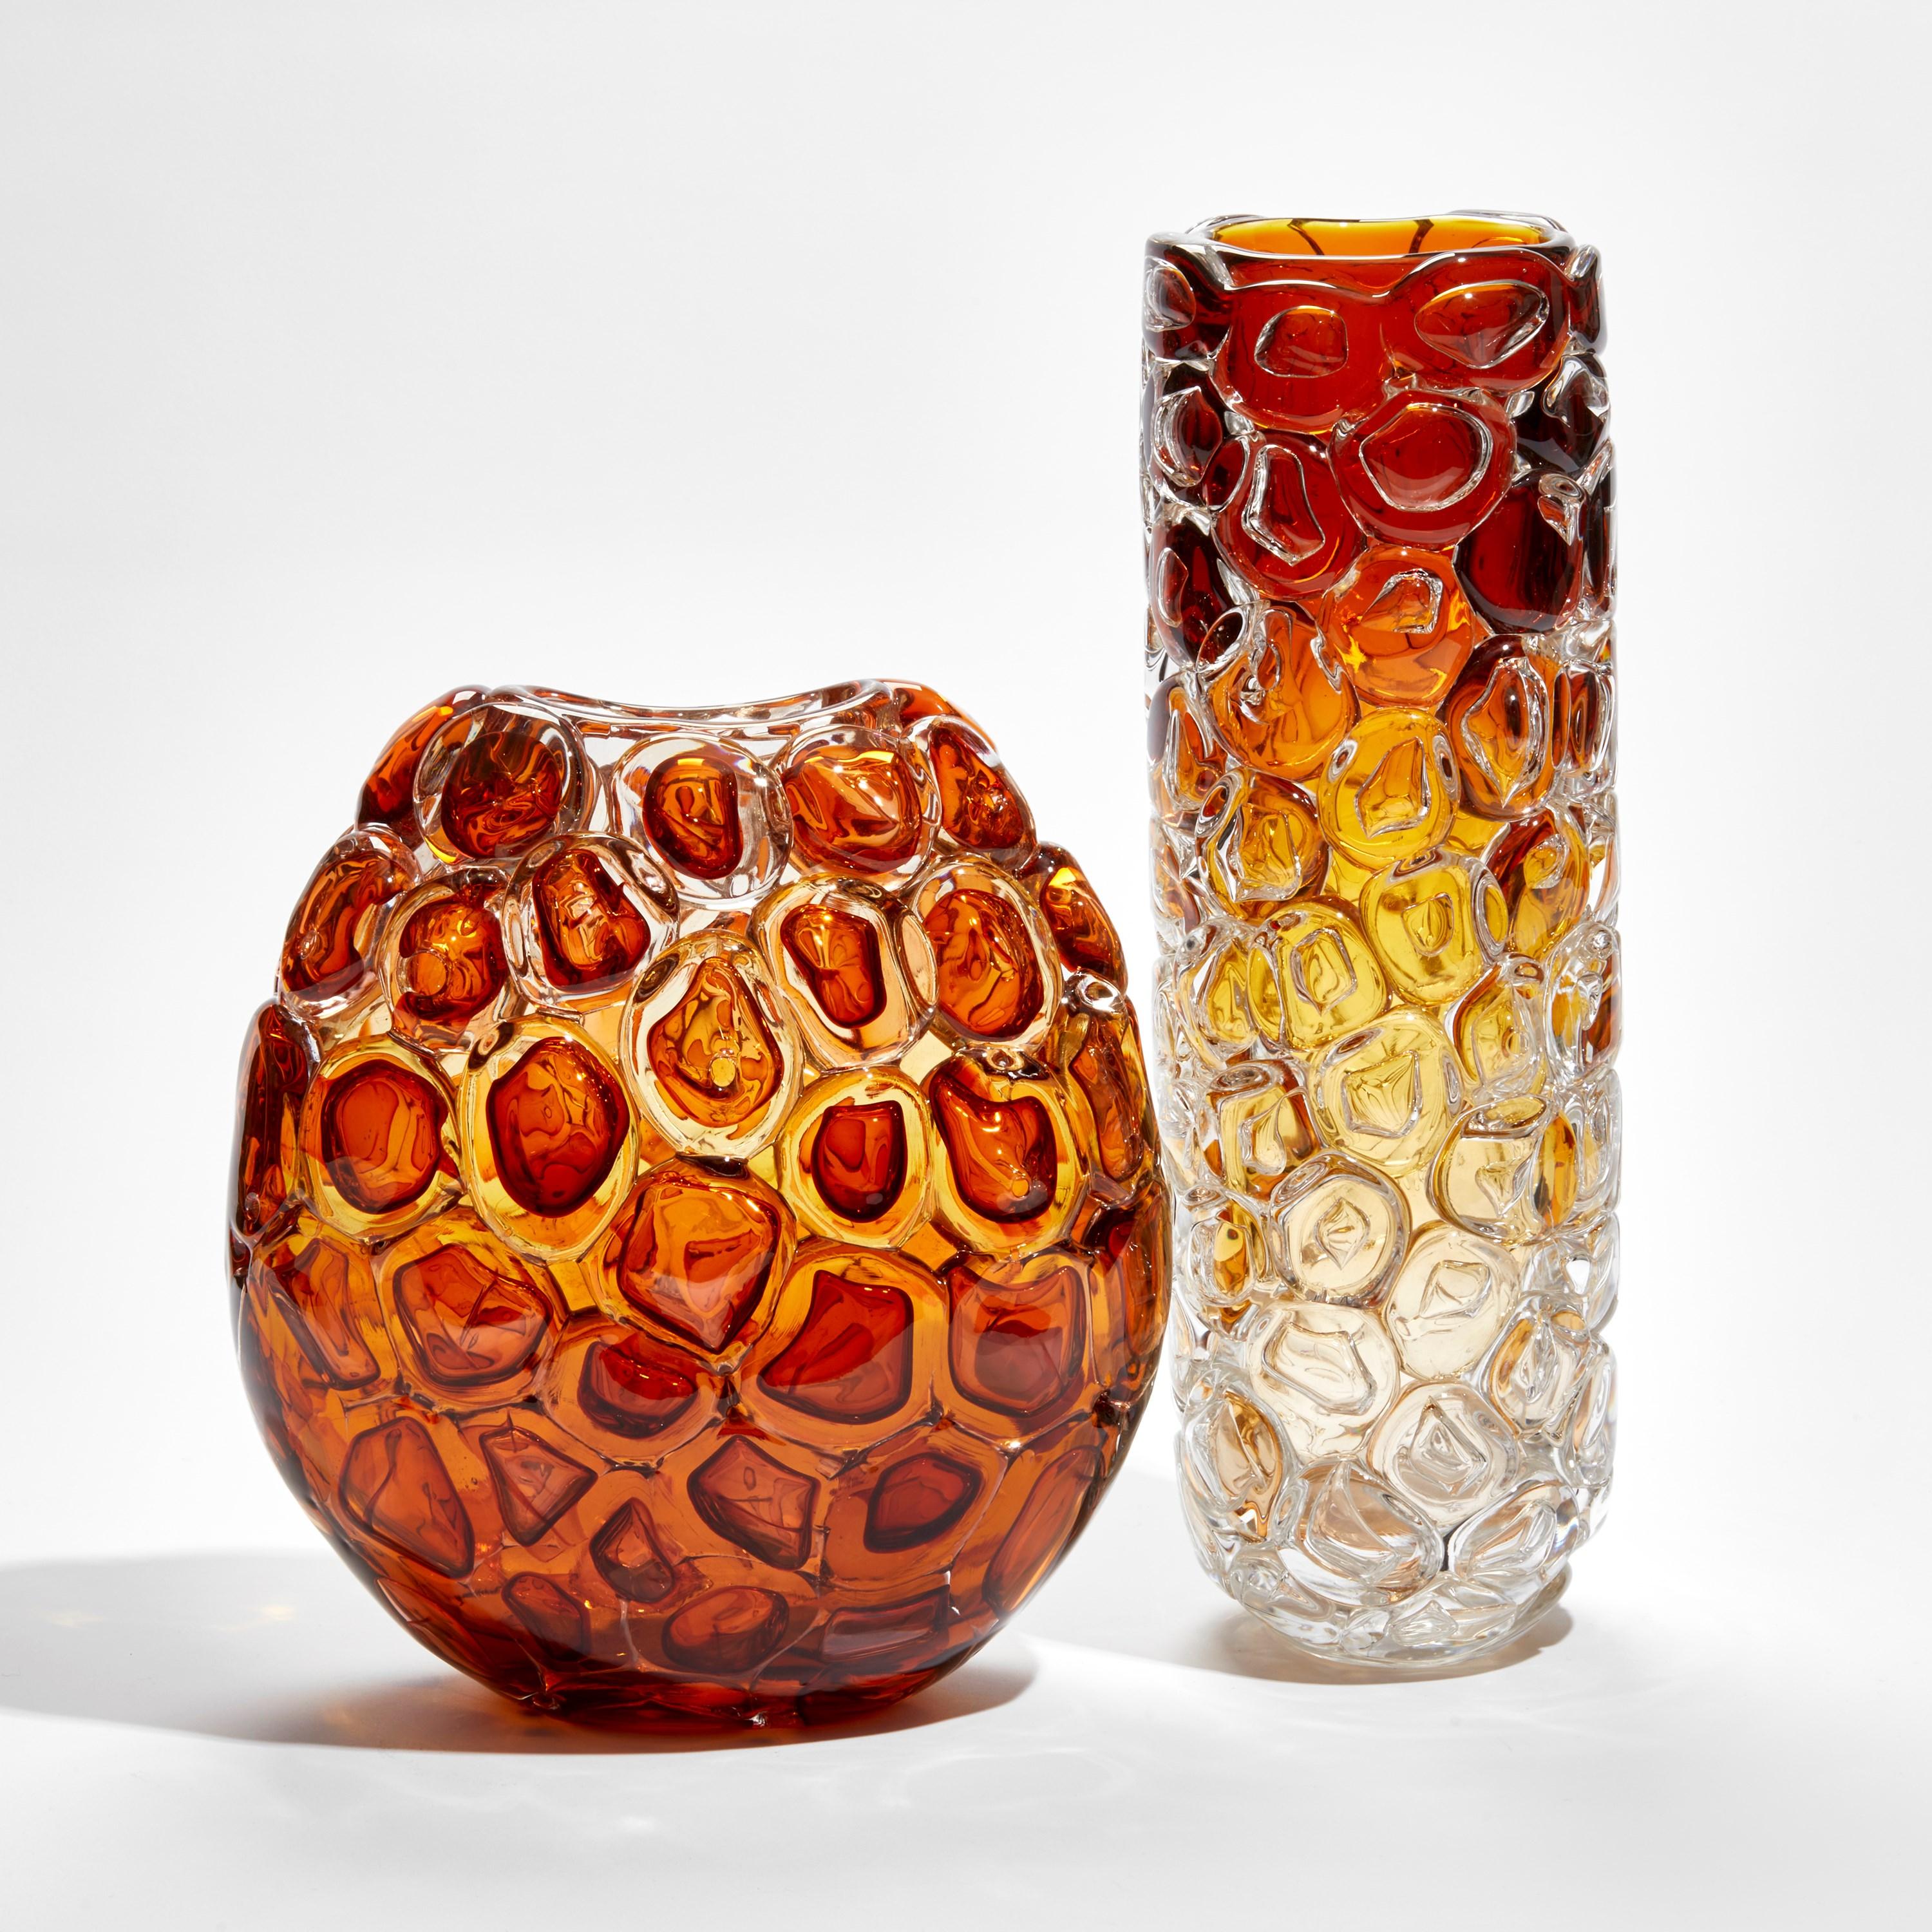 Hand-Crafted Bubblewrap in Burnt Orange, an Amber / Orange Glass Vase by Allister Malcolm